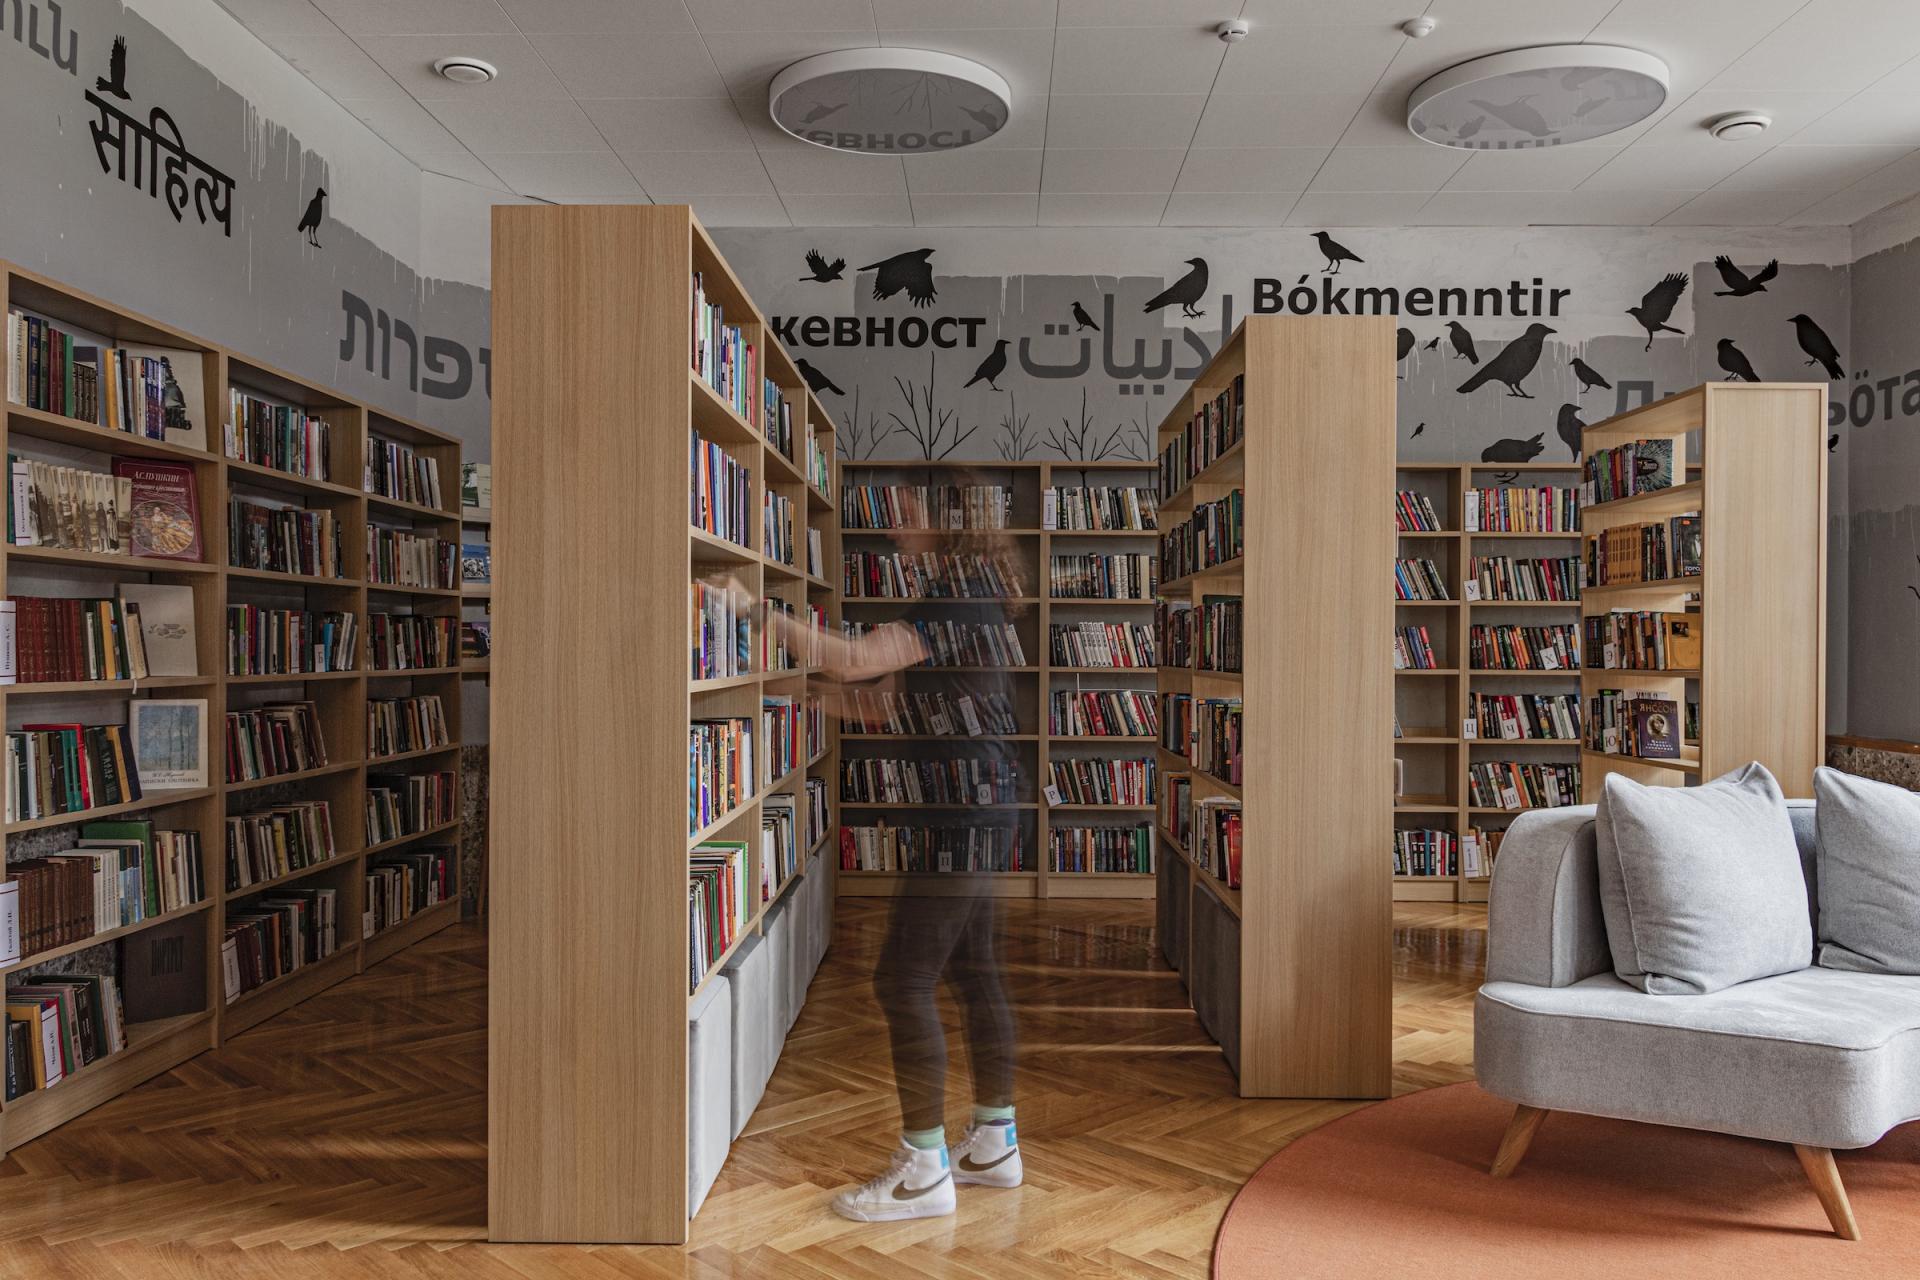 A 10,700 sq. ft. Small Town Library in Russia Gets a Creative Revamp Inspired by Soviet Era Aesthetics